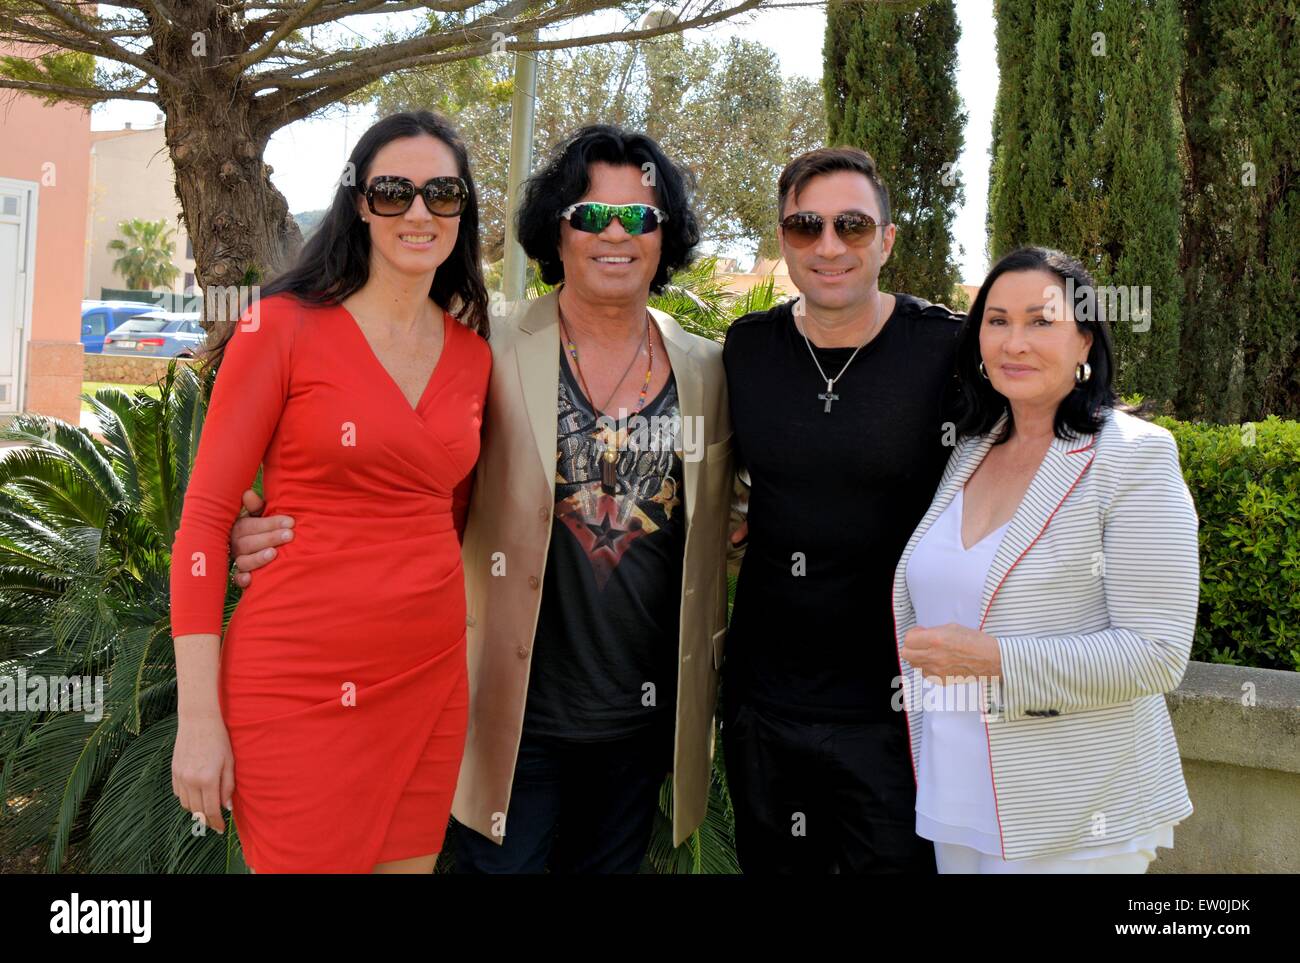 Celebrities attending the launch party of the new store 'Royal Body Concept' in Mallorca  Featuring: Lucas Cordalis, Costa Cordalis, Ingrid Cordalis, Kiki Cordalis Where: Sant Ponsa, Spain When: 29 Mar 2015 C Stock Photo